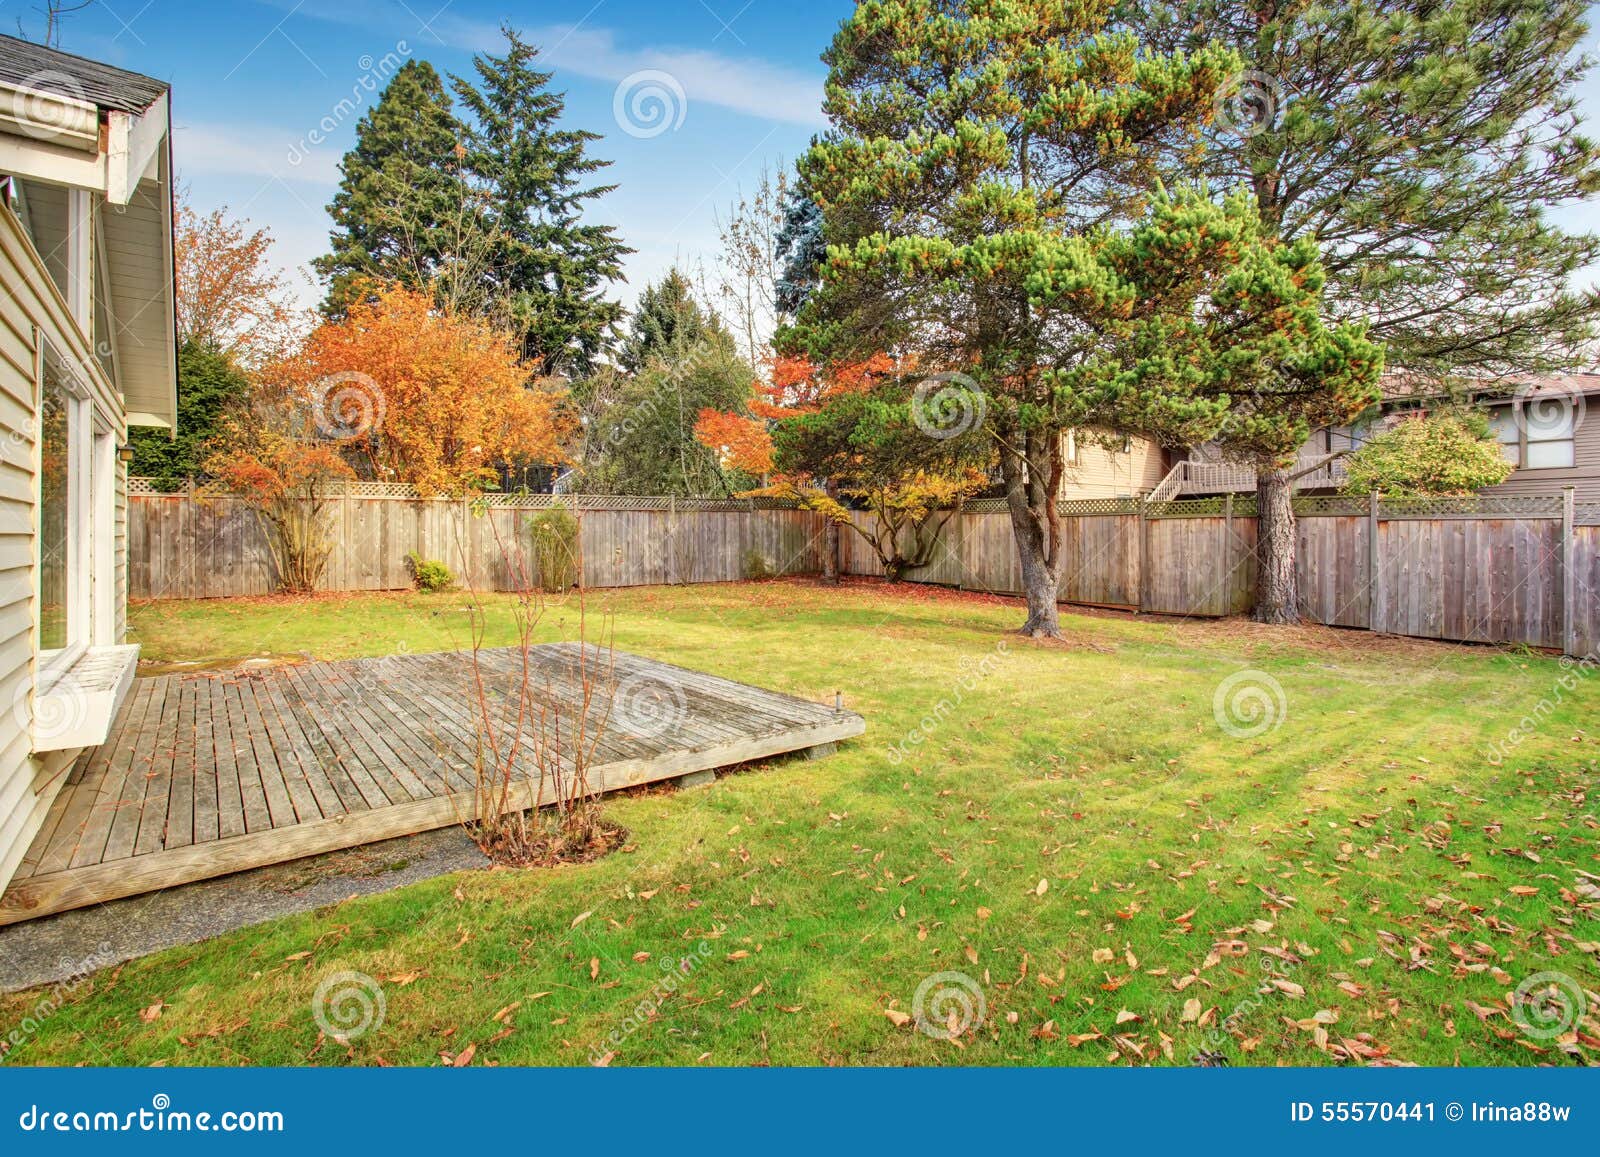 back yard with deck and grass.